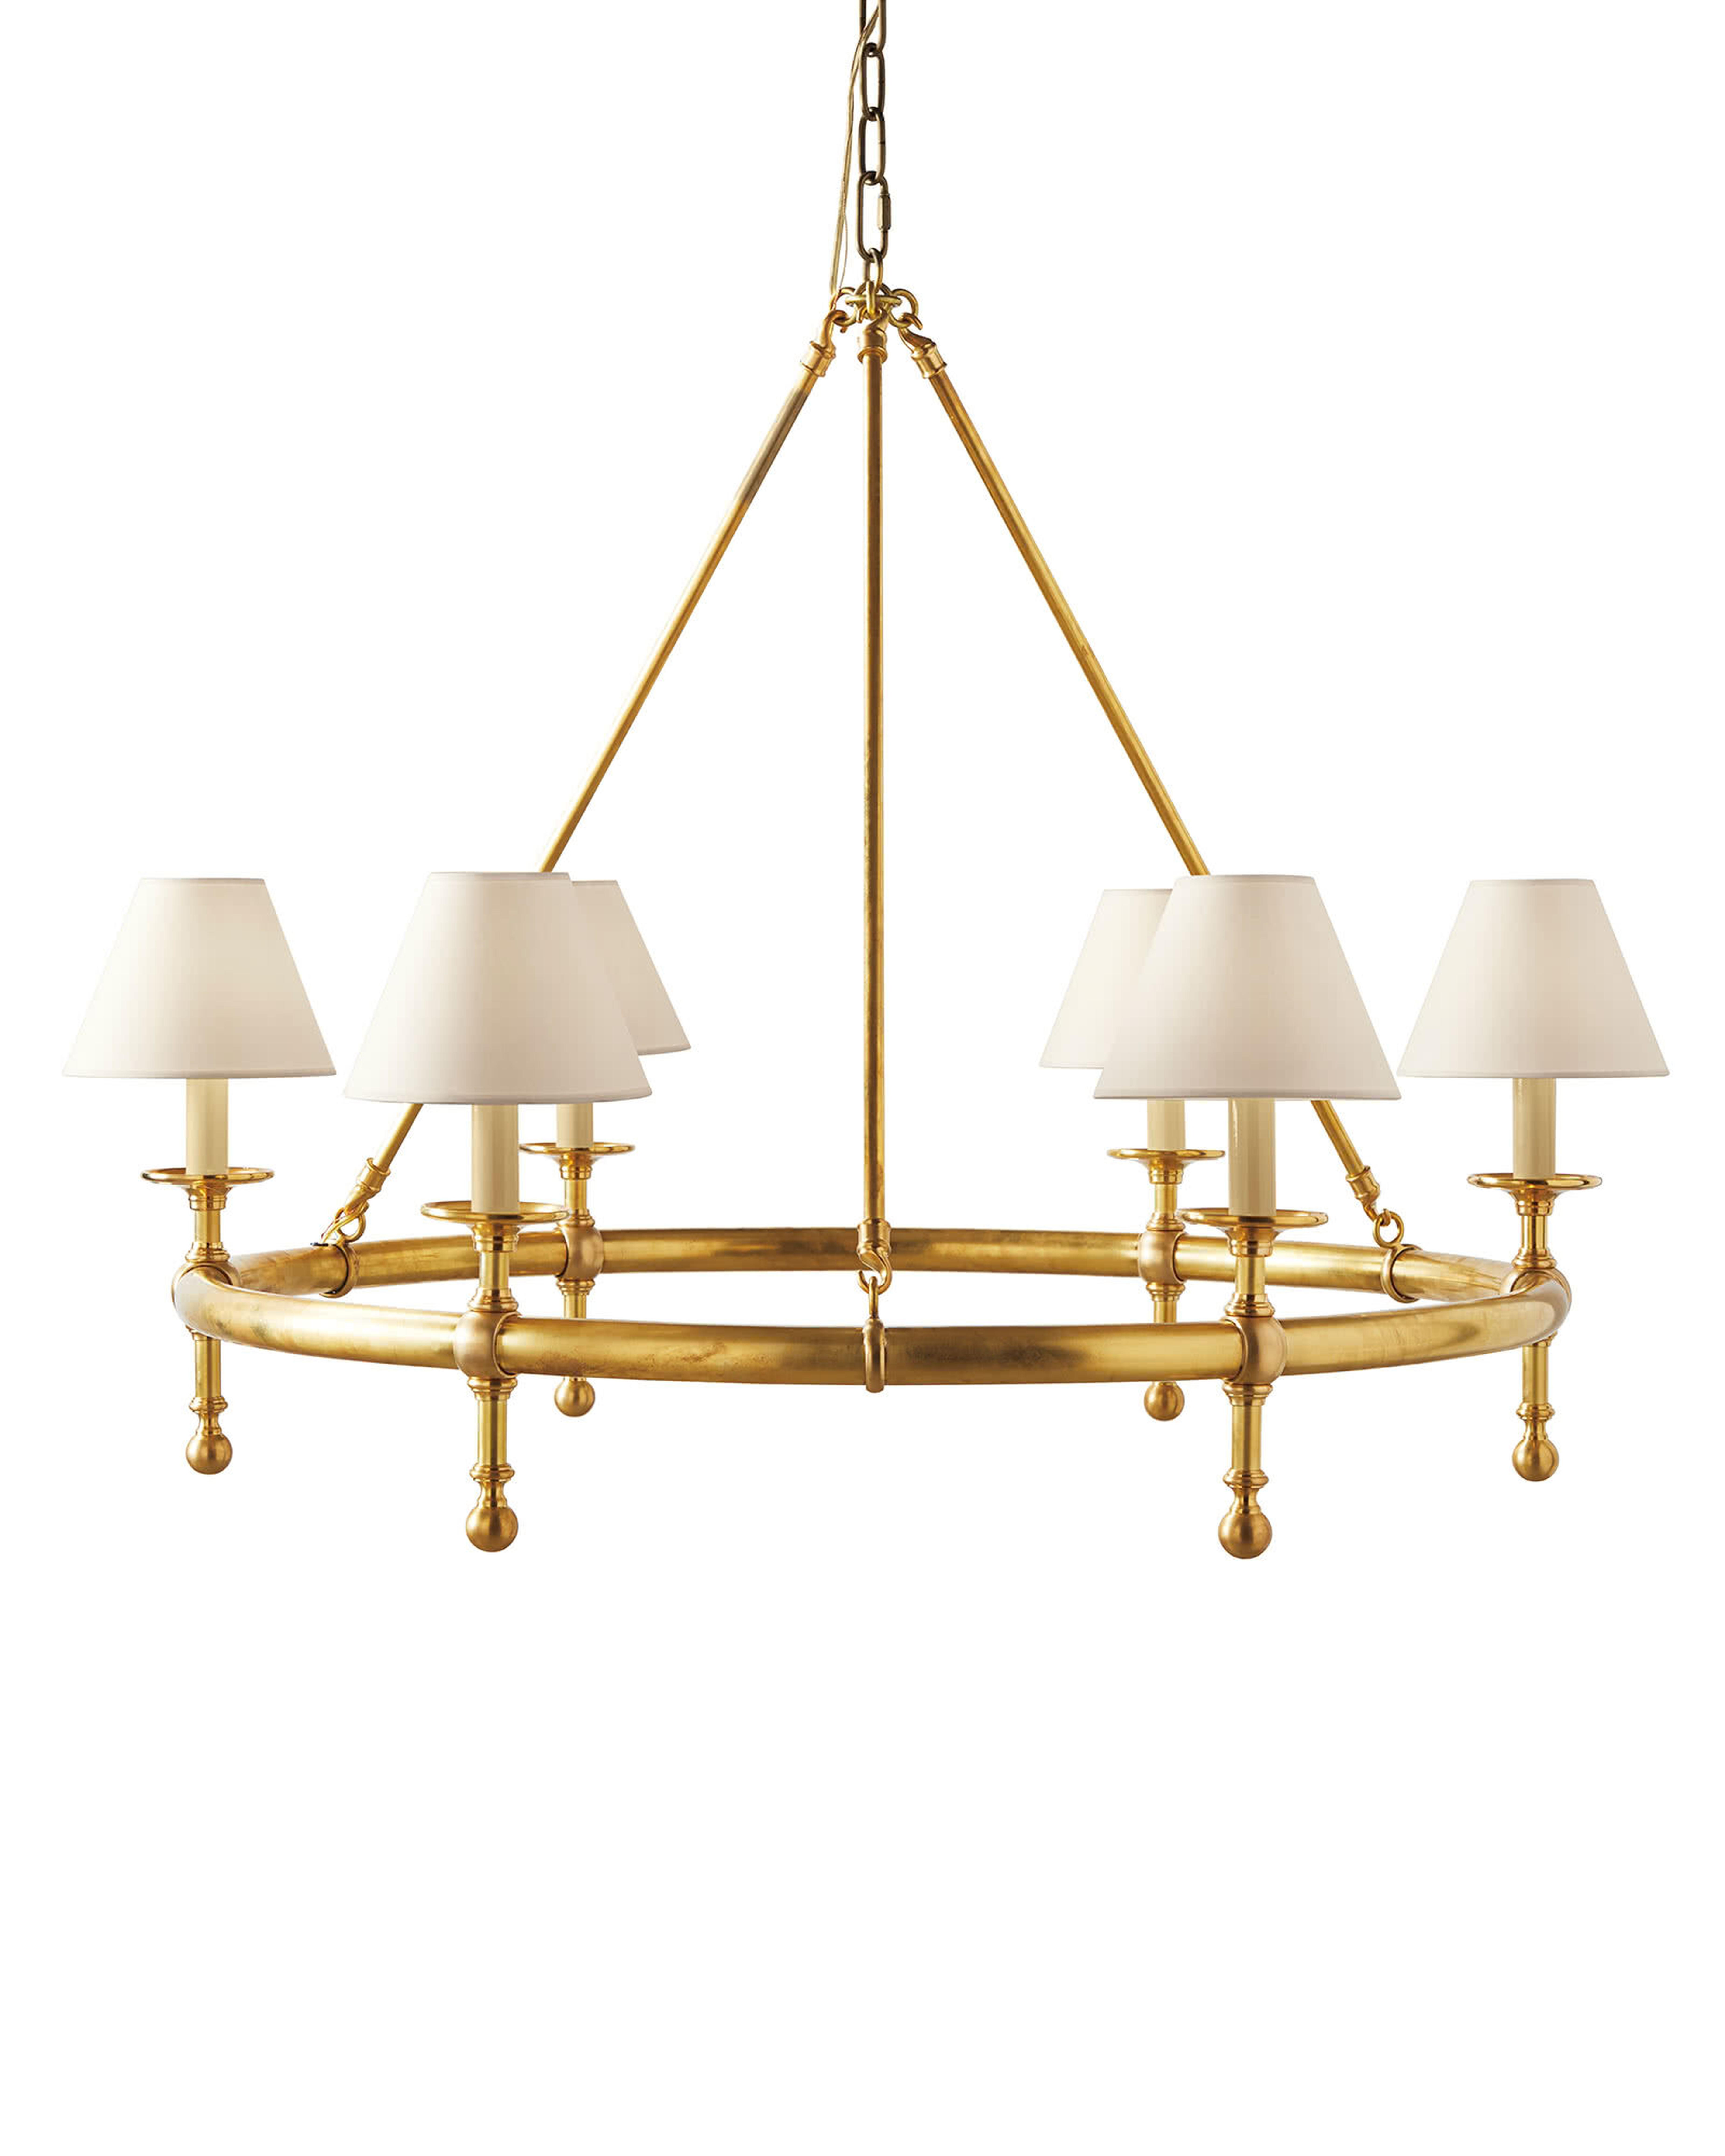 Rosecliff Chandelier - Serena and Lily